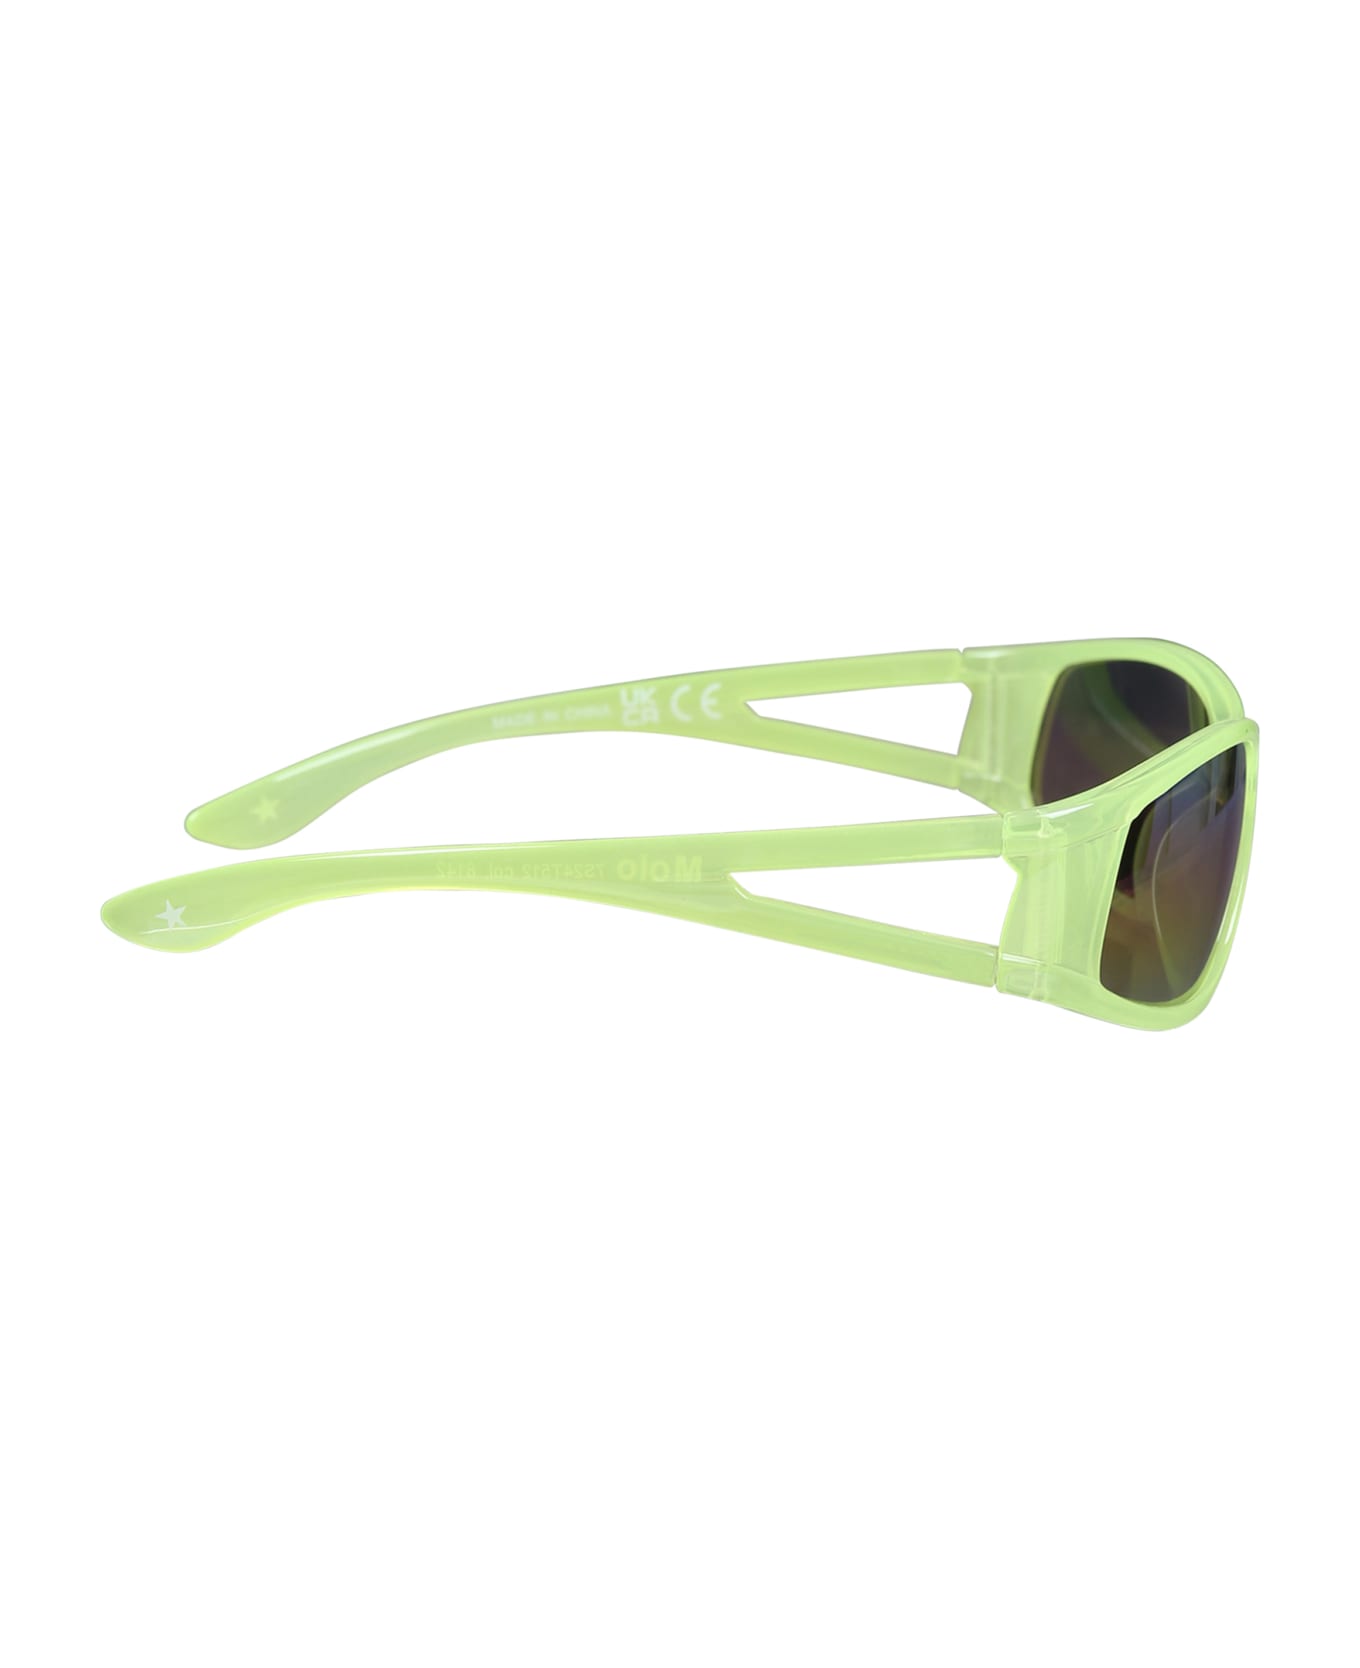 Molo Fluorescent Yellow Soso Sunglasses For Kids - Green アクセサリー＆ギフト